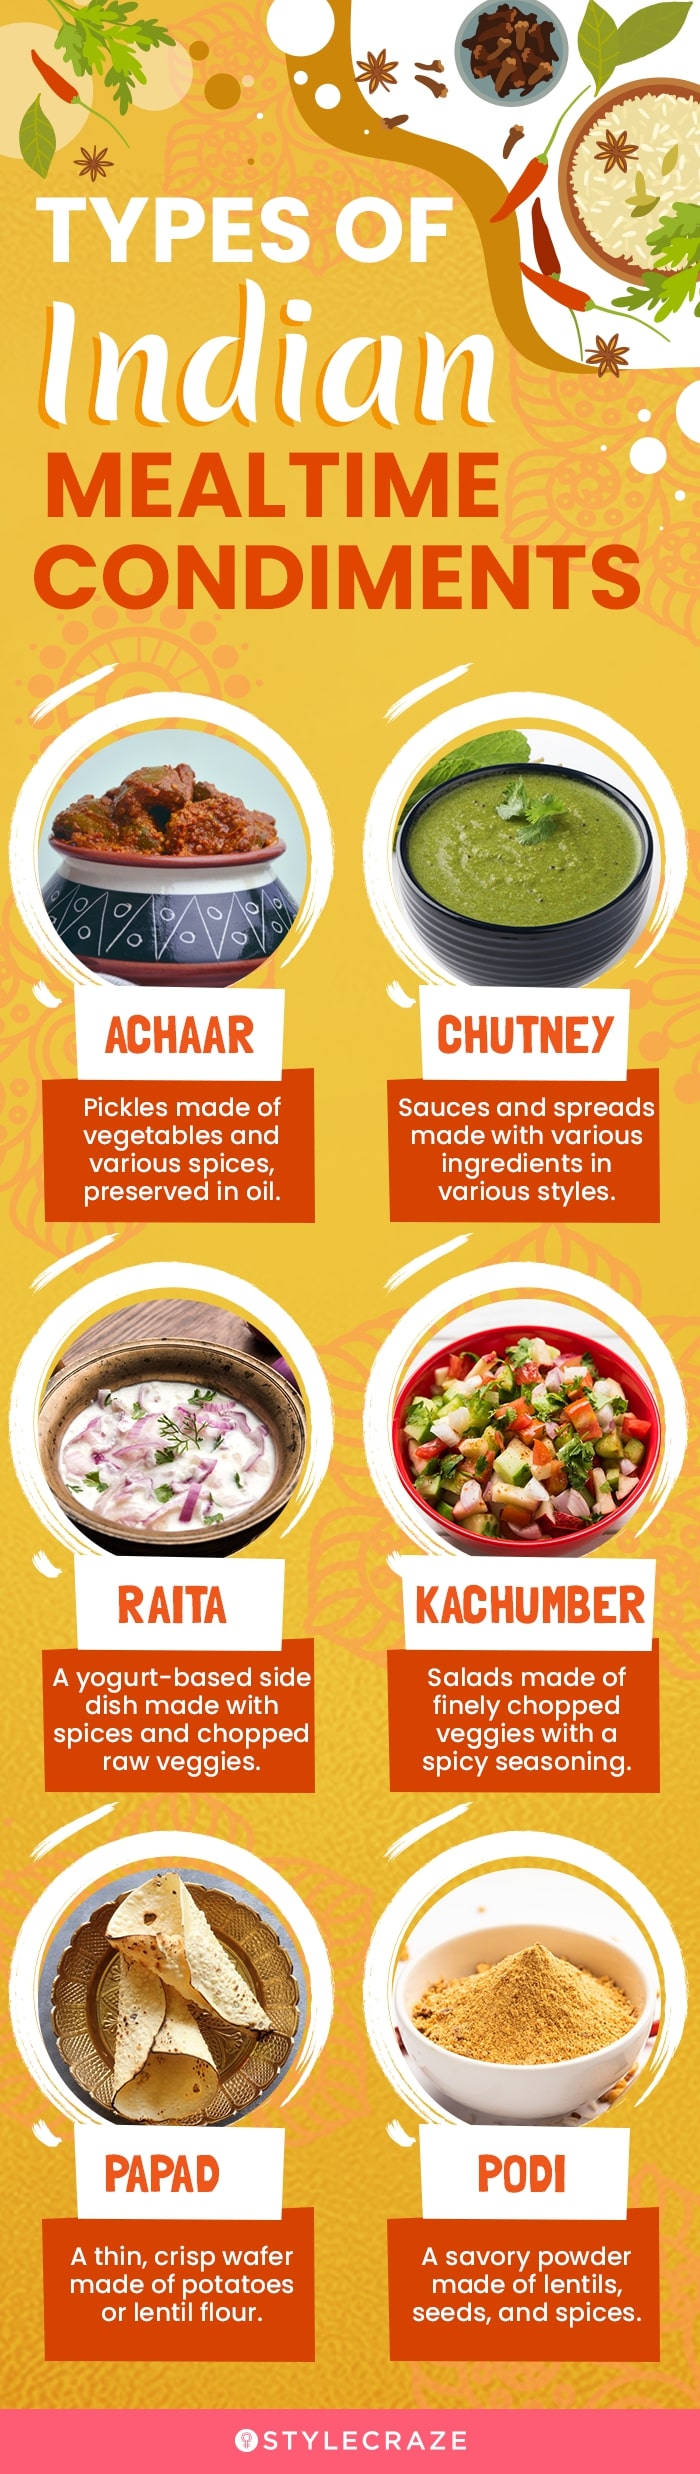 types of indian mealtime condiments (infographic)